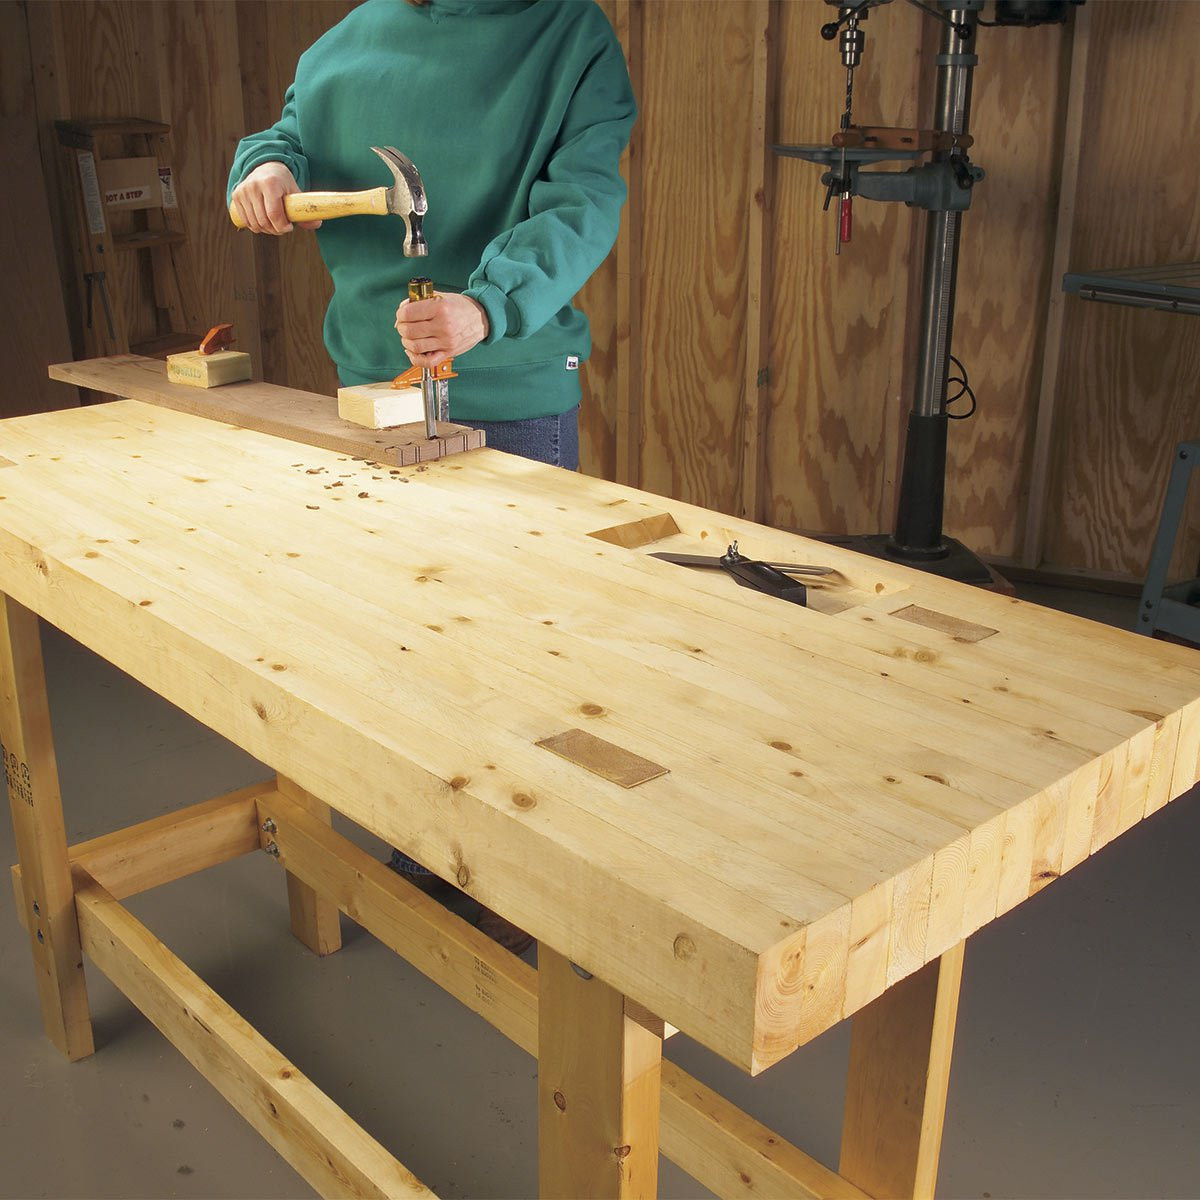 DIY Wooden Workbenches
 12 Super Simple Workbenches You Can Build